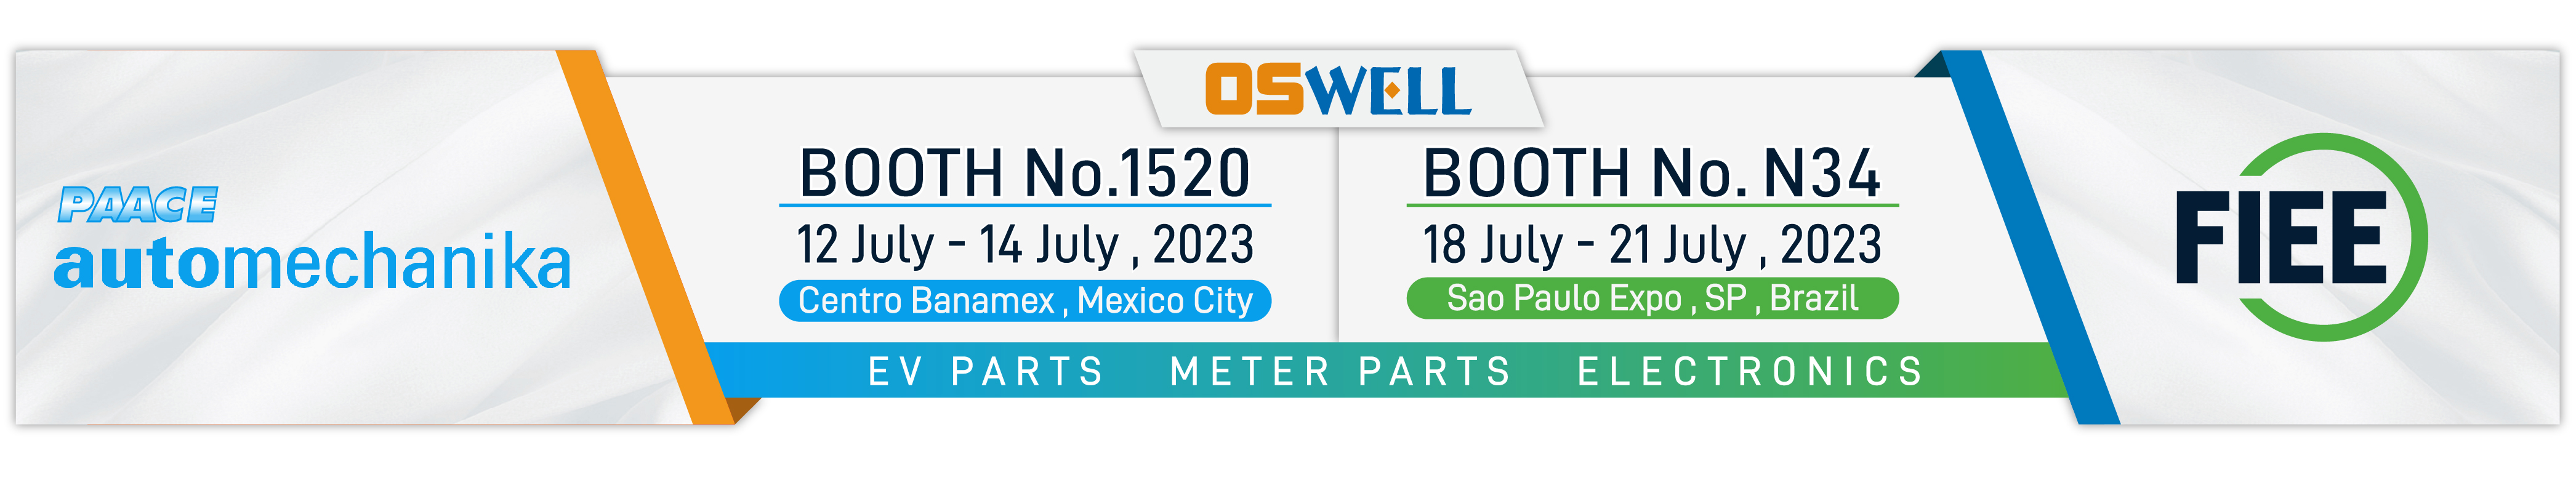 Professional products, quality assurance, OSWELL present at exhibitions in Mexico and Brazil(图2)